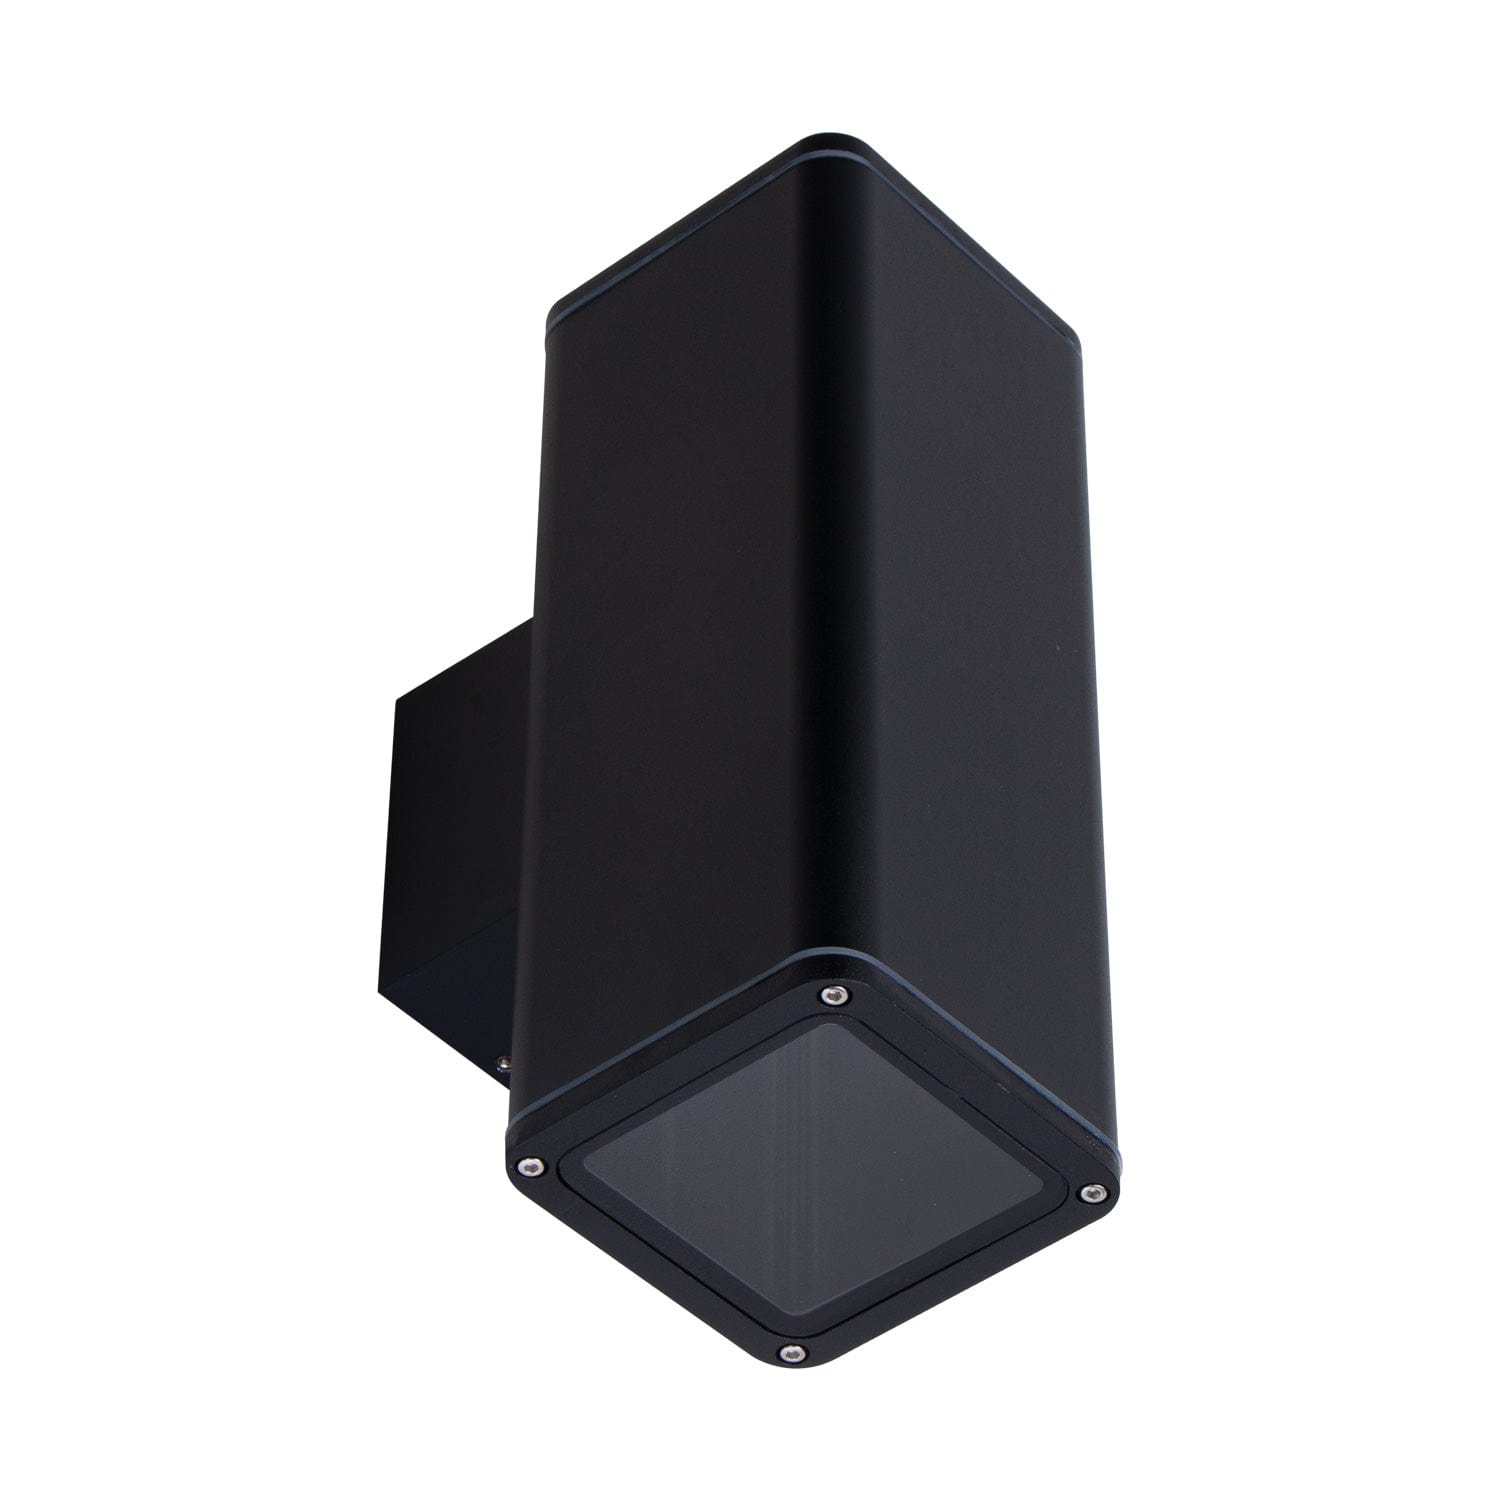 Domus Lighting Outdoor Wall Lights BLACK / 5000K DOMUS PIPER-2 SQUARE LED WALL LIGHT Lights-For-You 49229